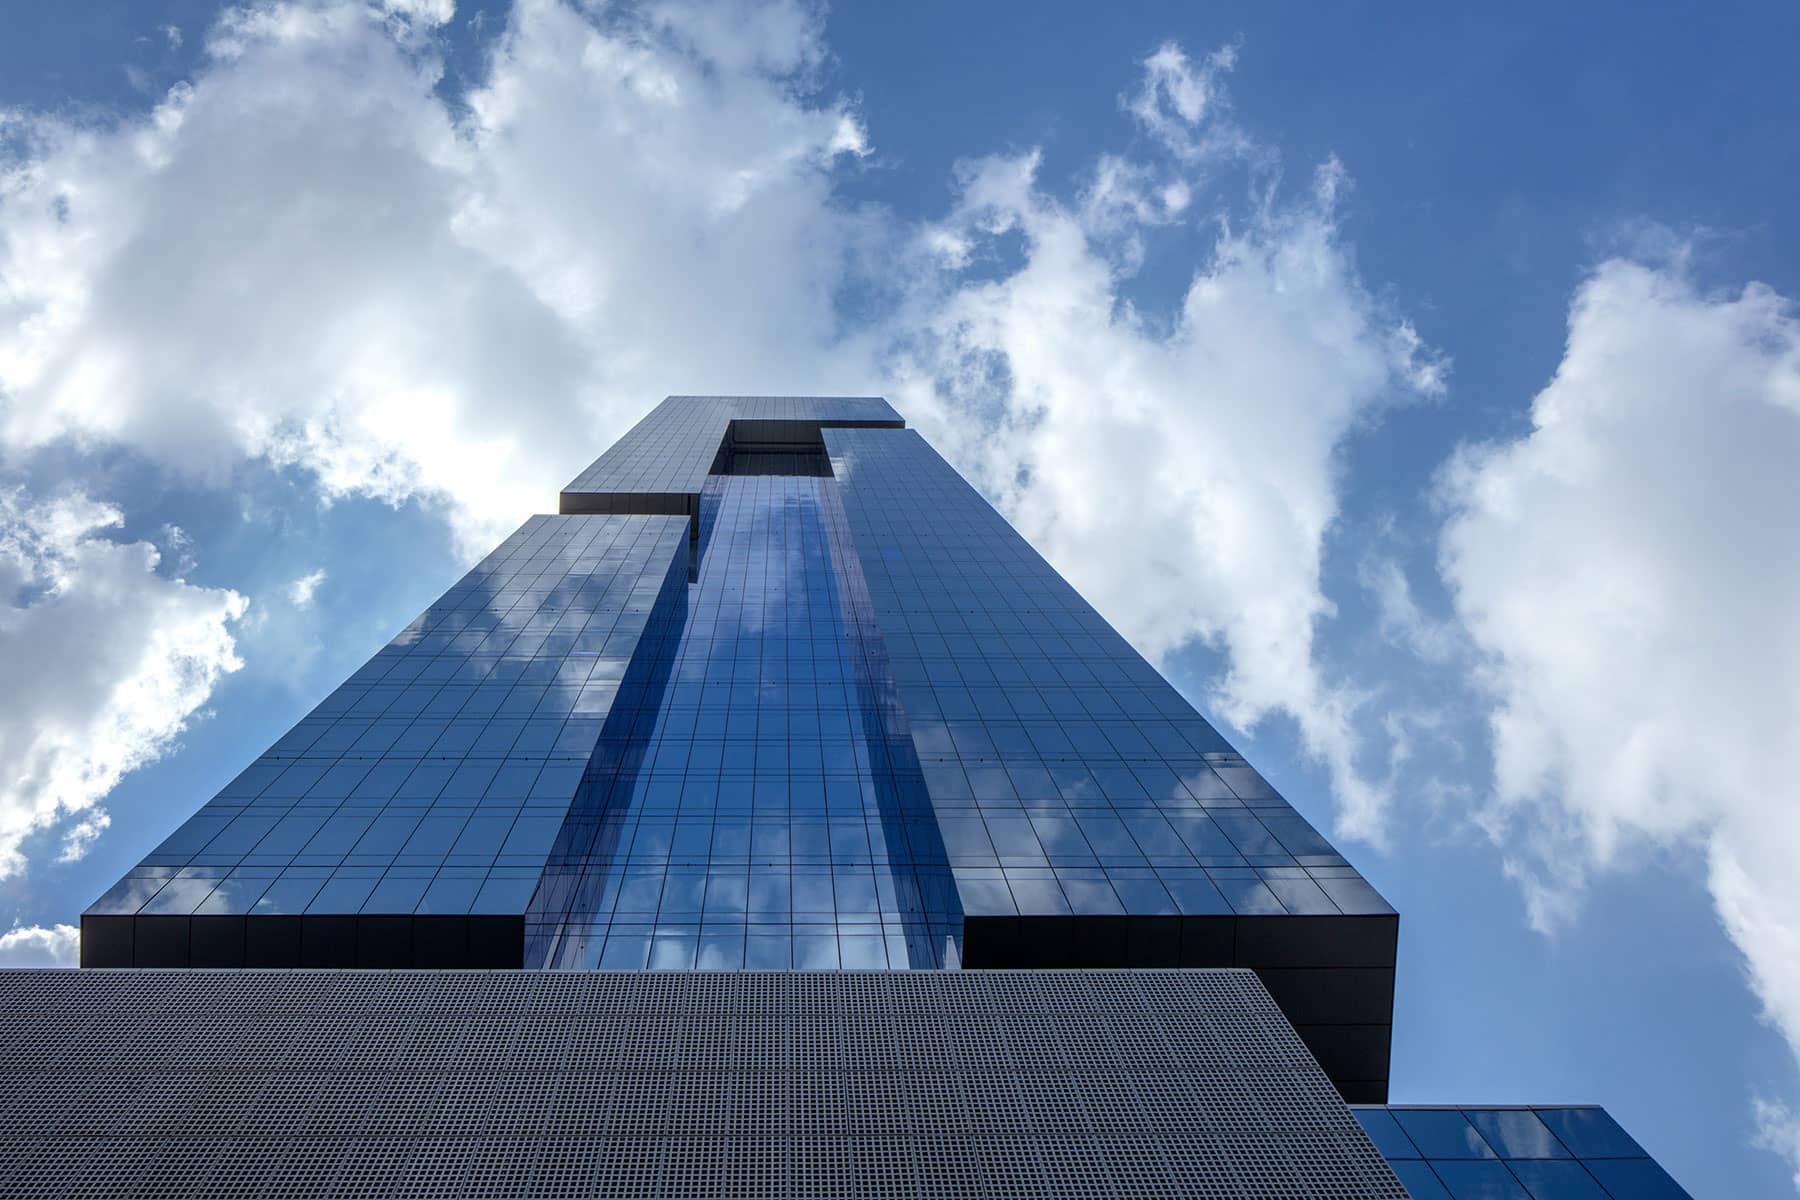 Architecture Photography: A skyward perspective of the glass façade reflecting the clouds at the First Collection.